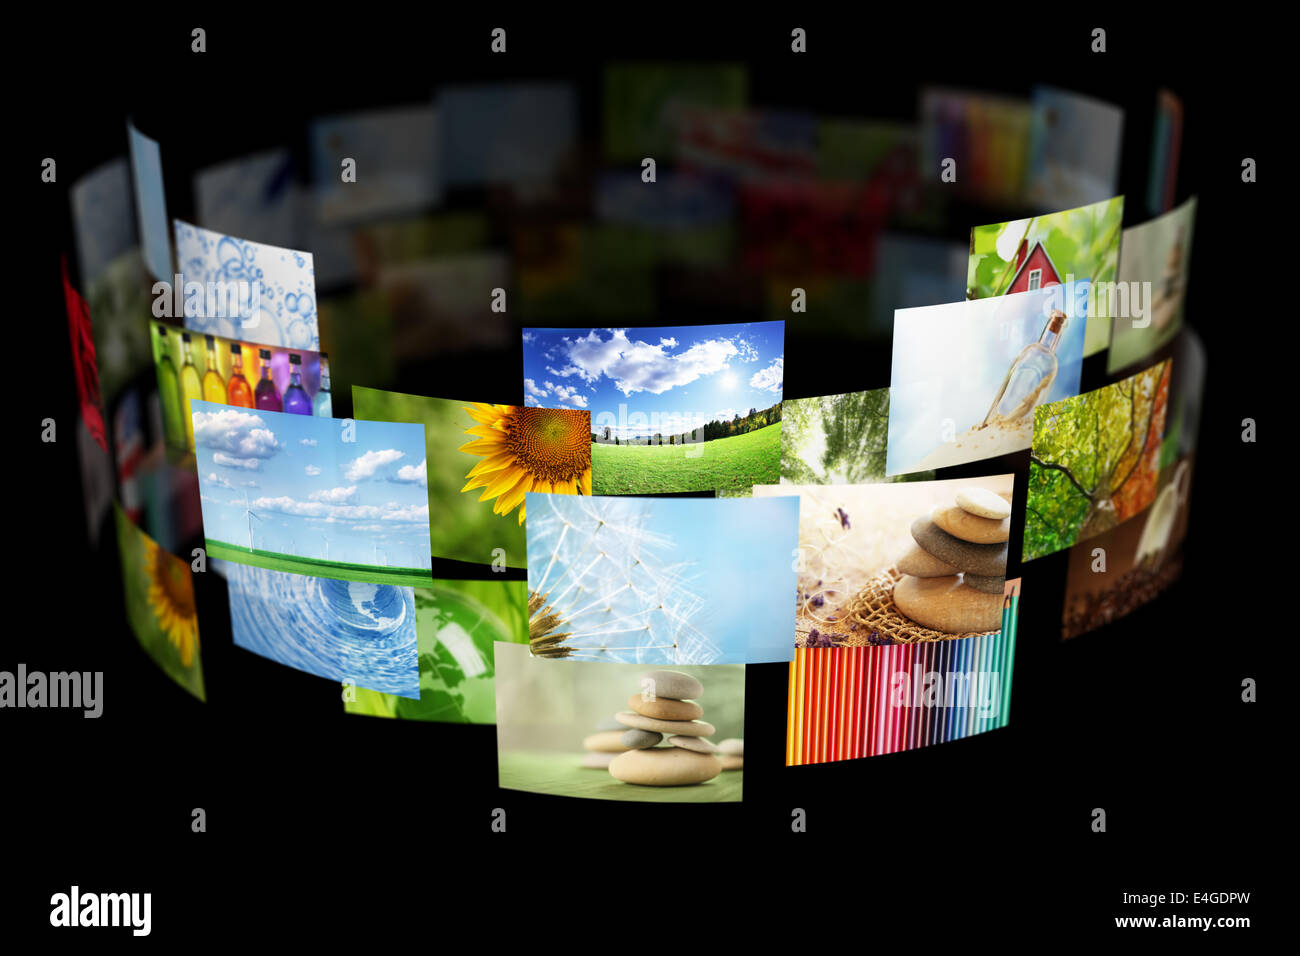 Collage of images background Stock Photo